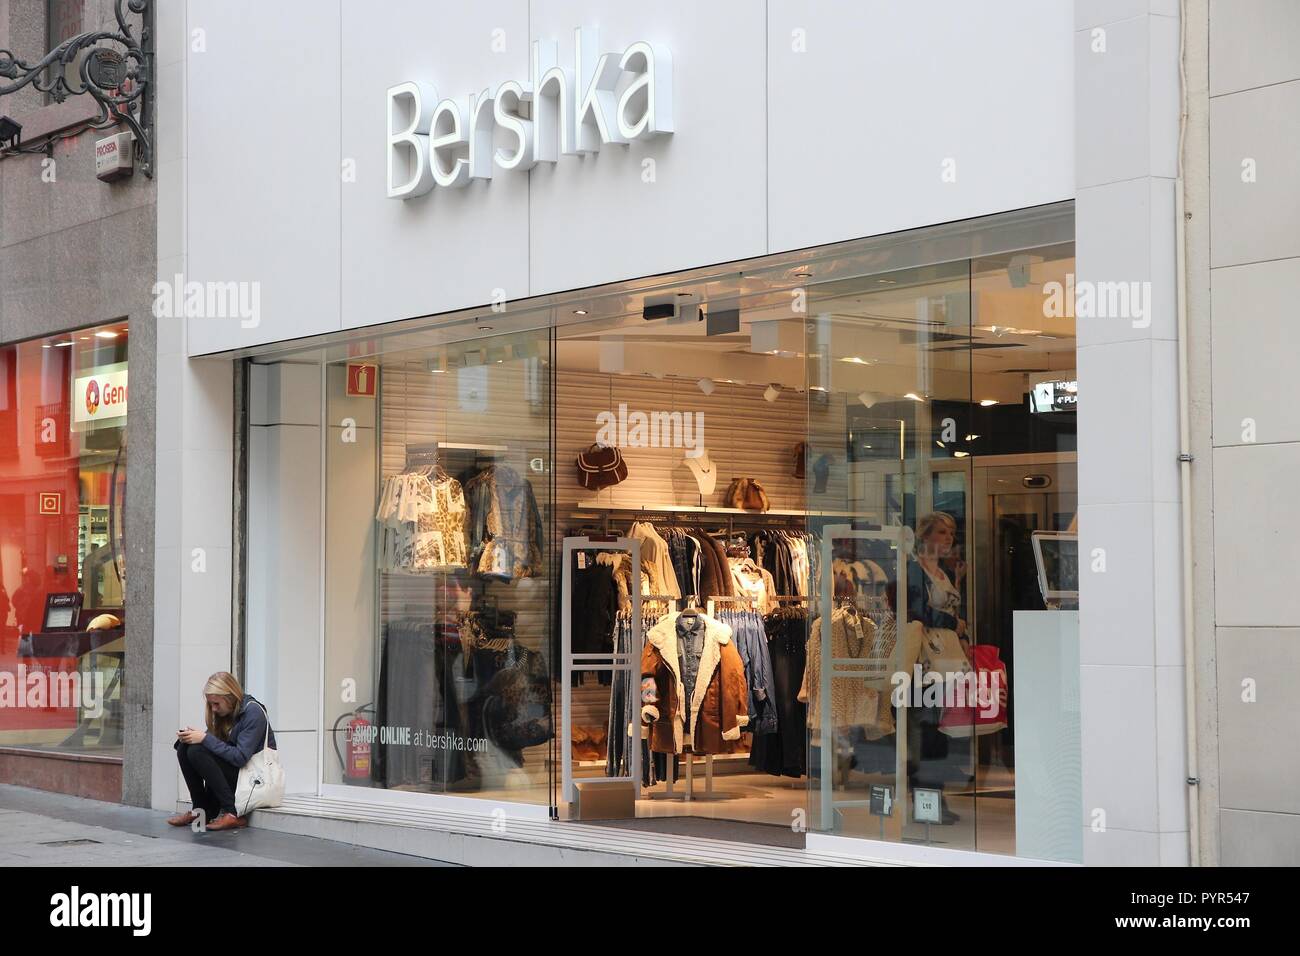 MADRID - OCTOBER 24: People shop at Bershka store on October 24, 2012 in  Madrid. Bershka has 910 stores in 64 countries Stock Photo - Alamy